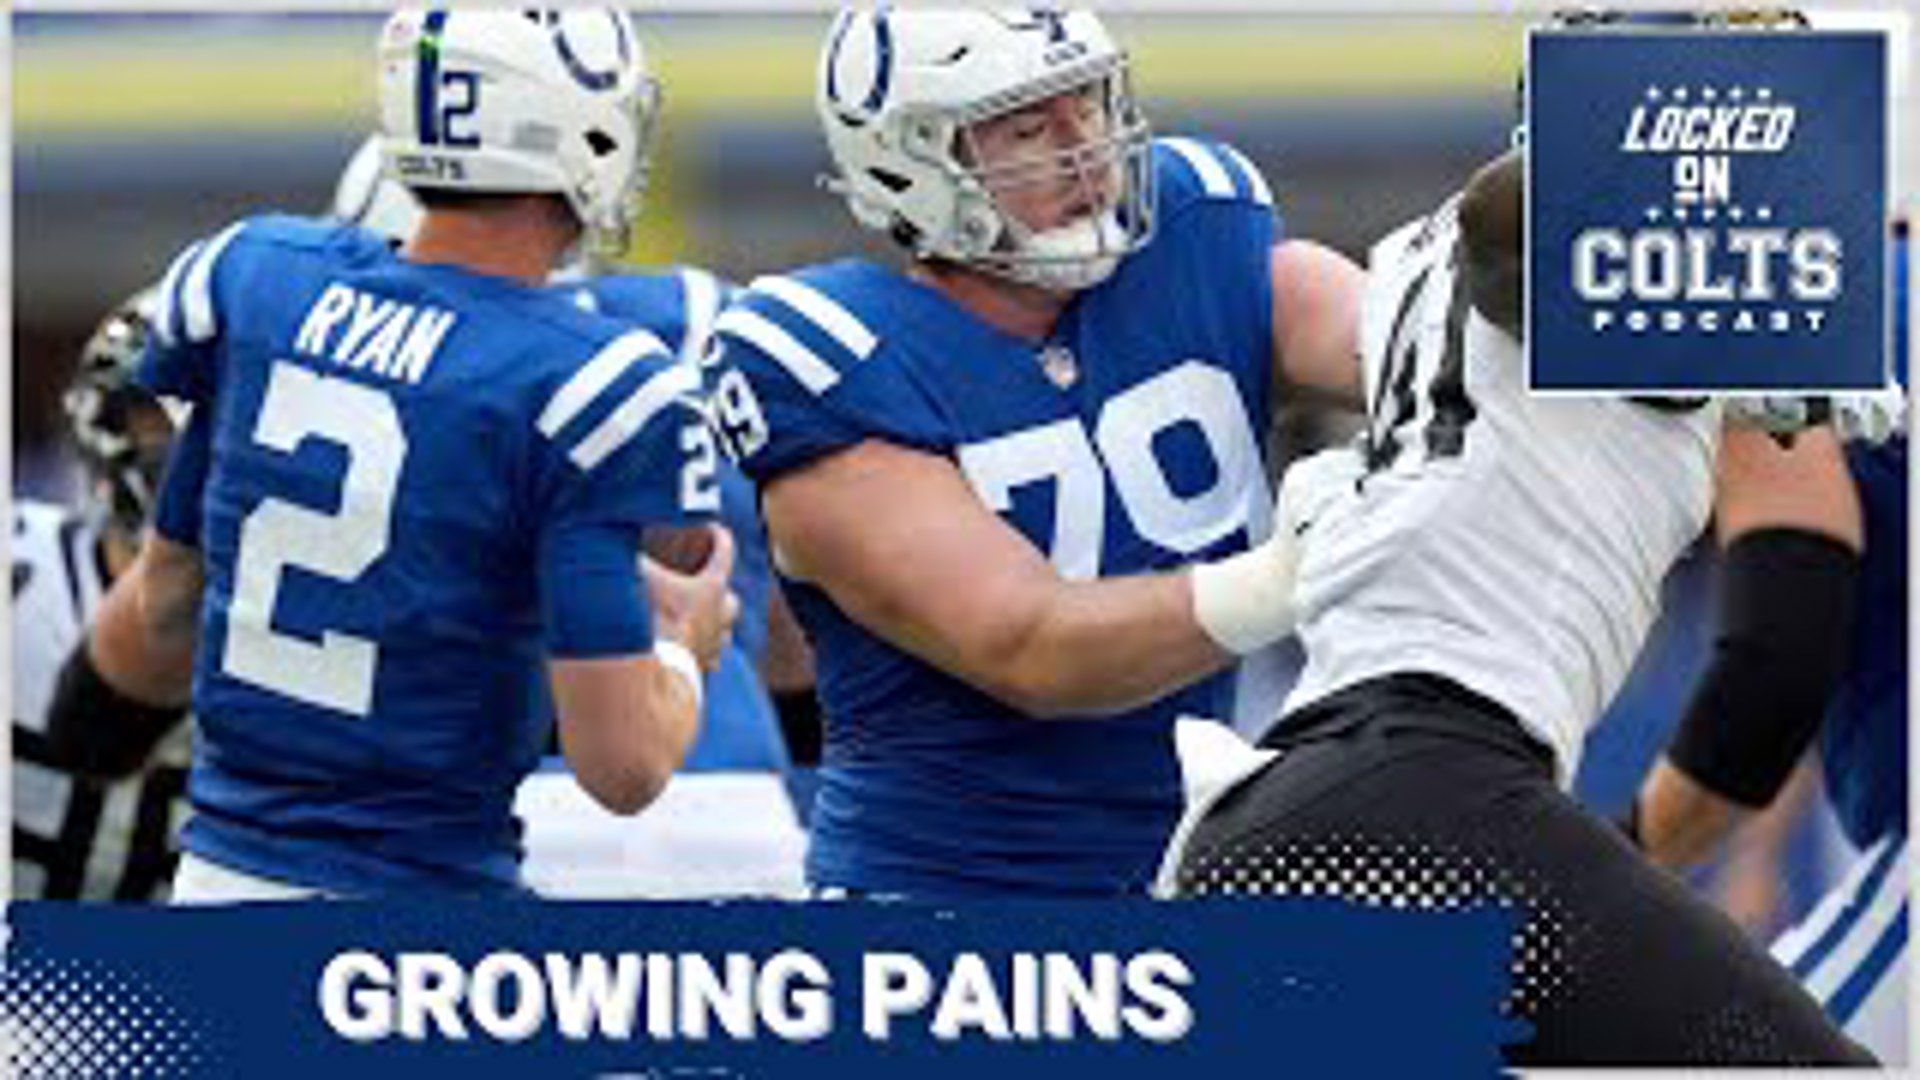 Is it worth it to play them while they develop or should the Colts look for a quicker fix?